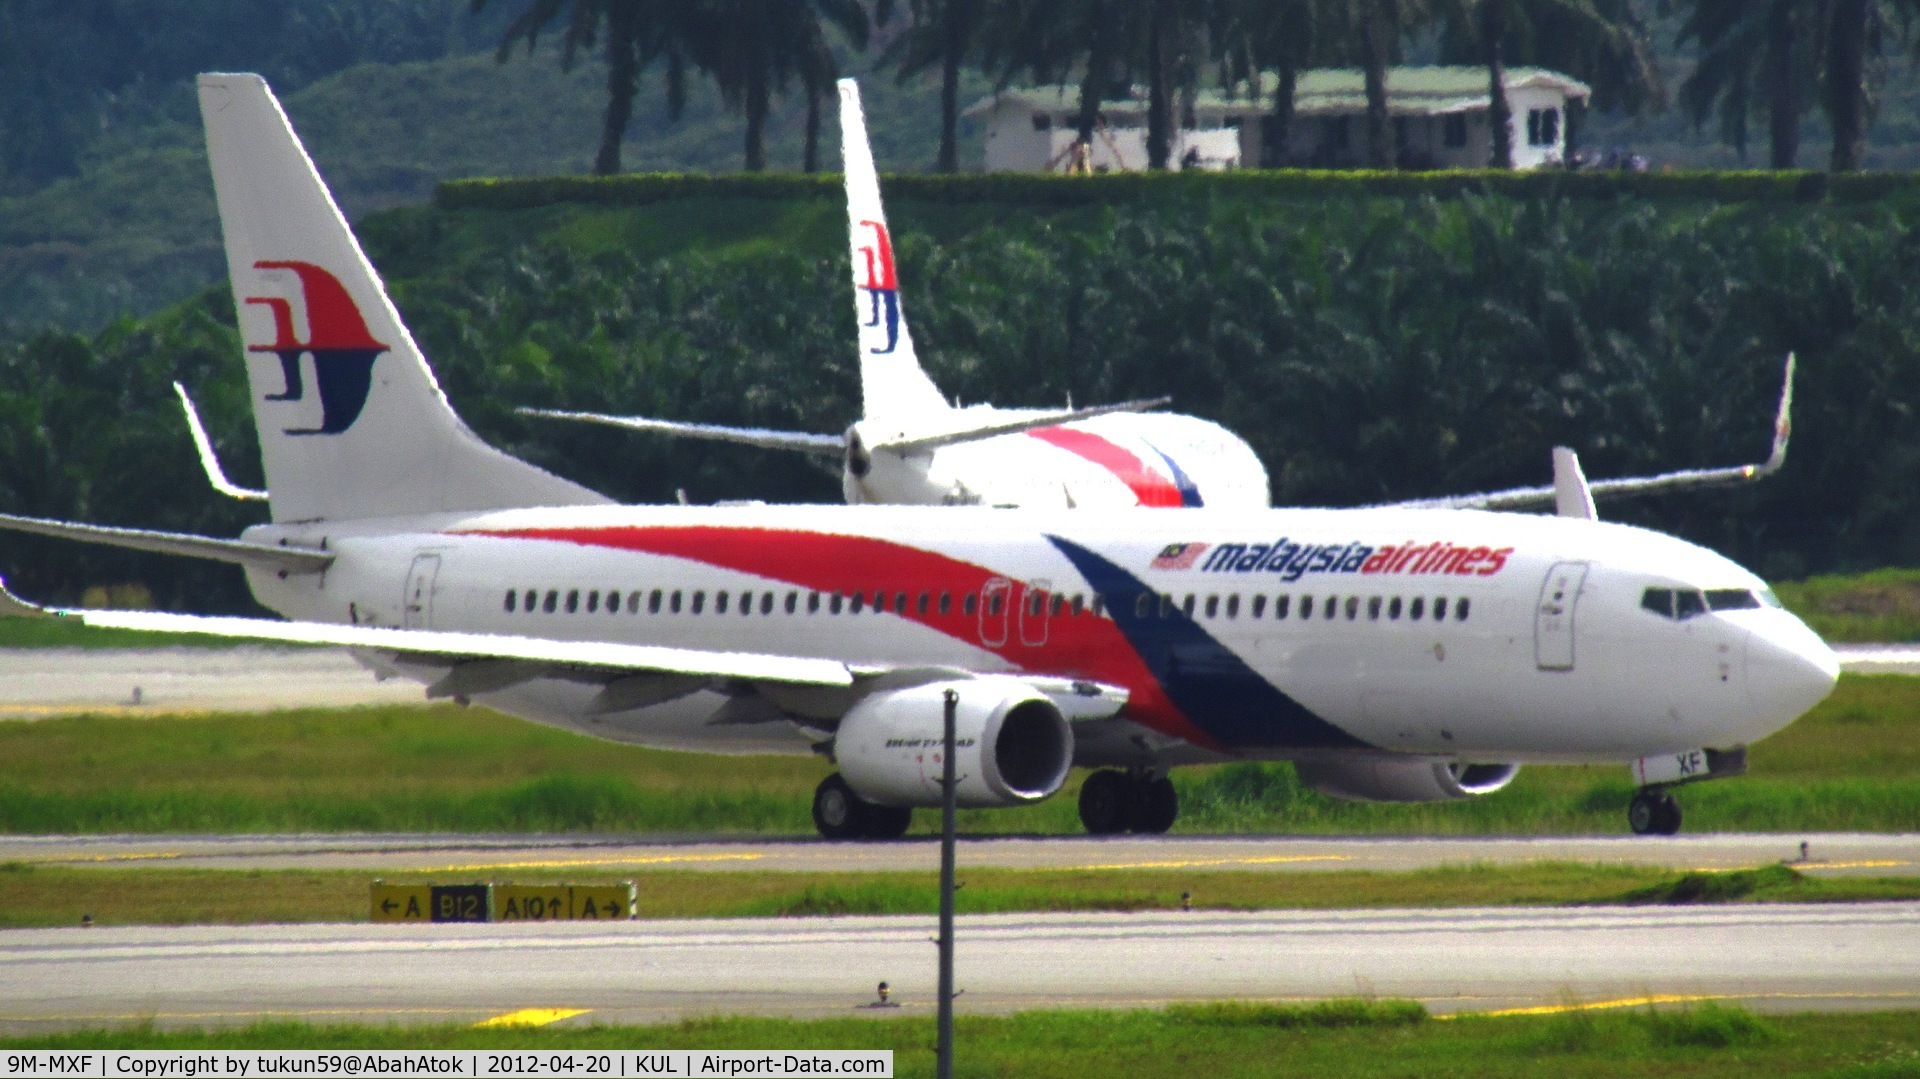 9M-MXF, 2013 Boeing 737-8H6 C/N 40133/3806, Malaysia Airlines